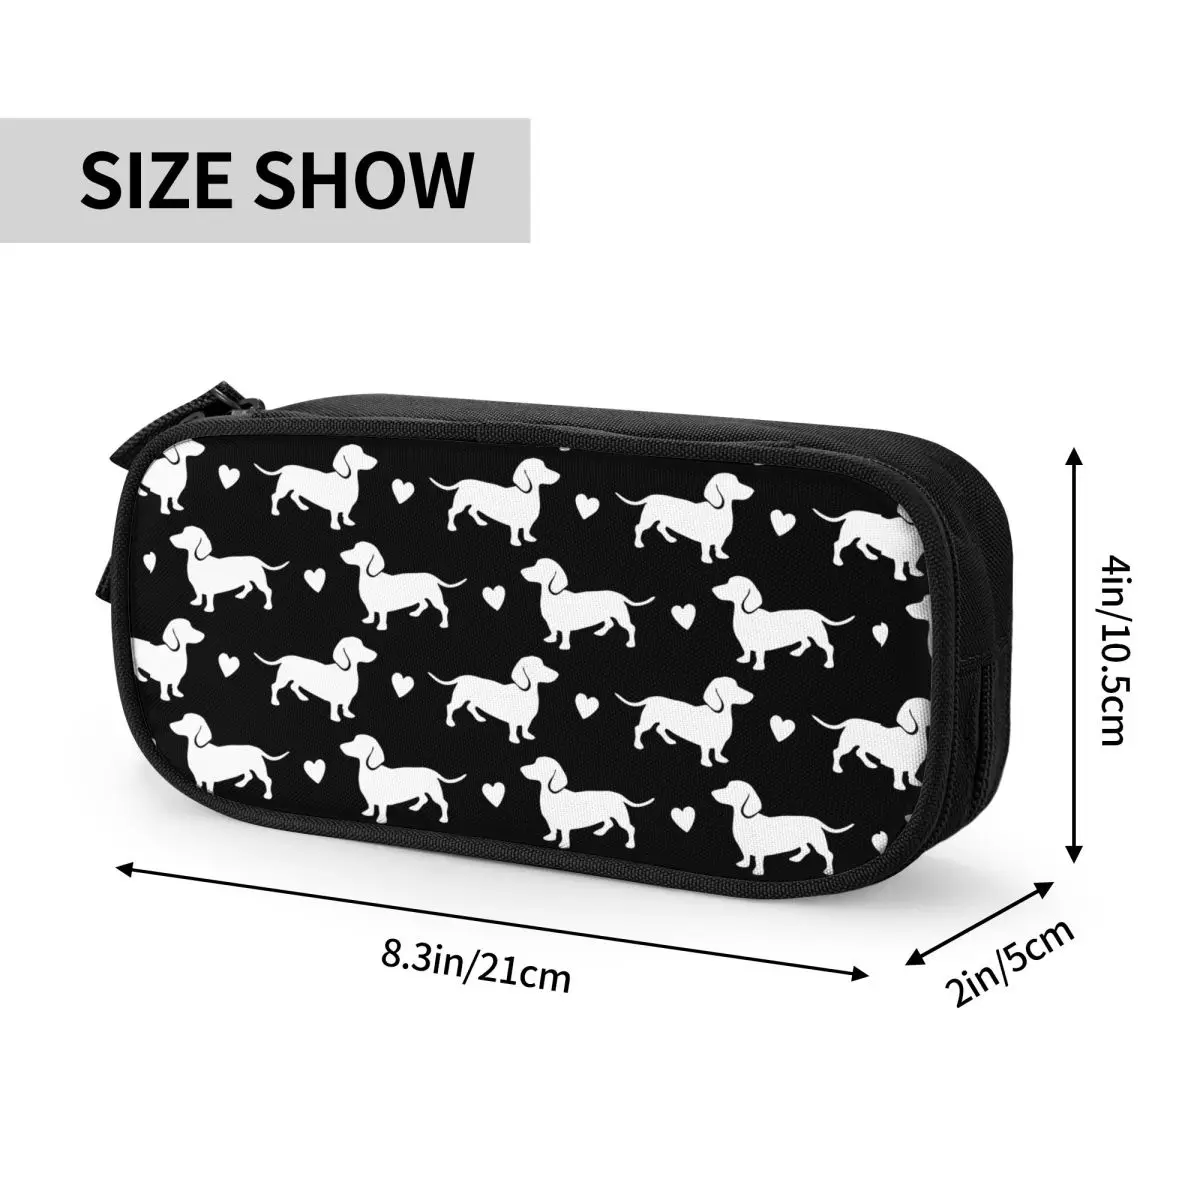 Dachshund Dixie Dog Lover Pencil Cases Wiener Sausage Pen Box Bags for Student Big Capacity Students School Cosmetic Pencil Box images - 6